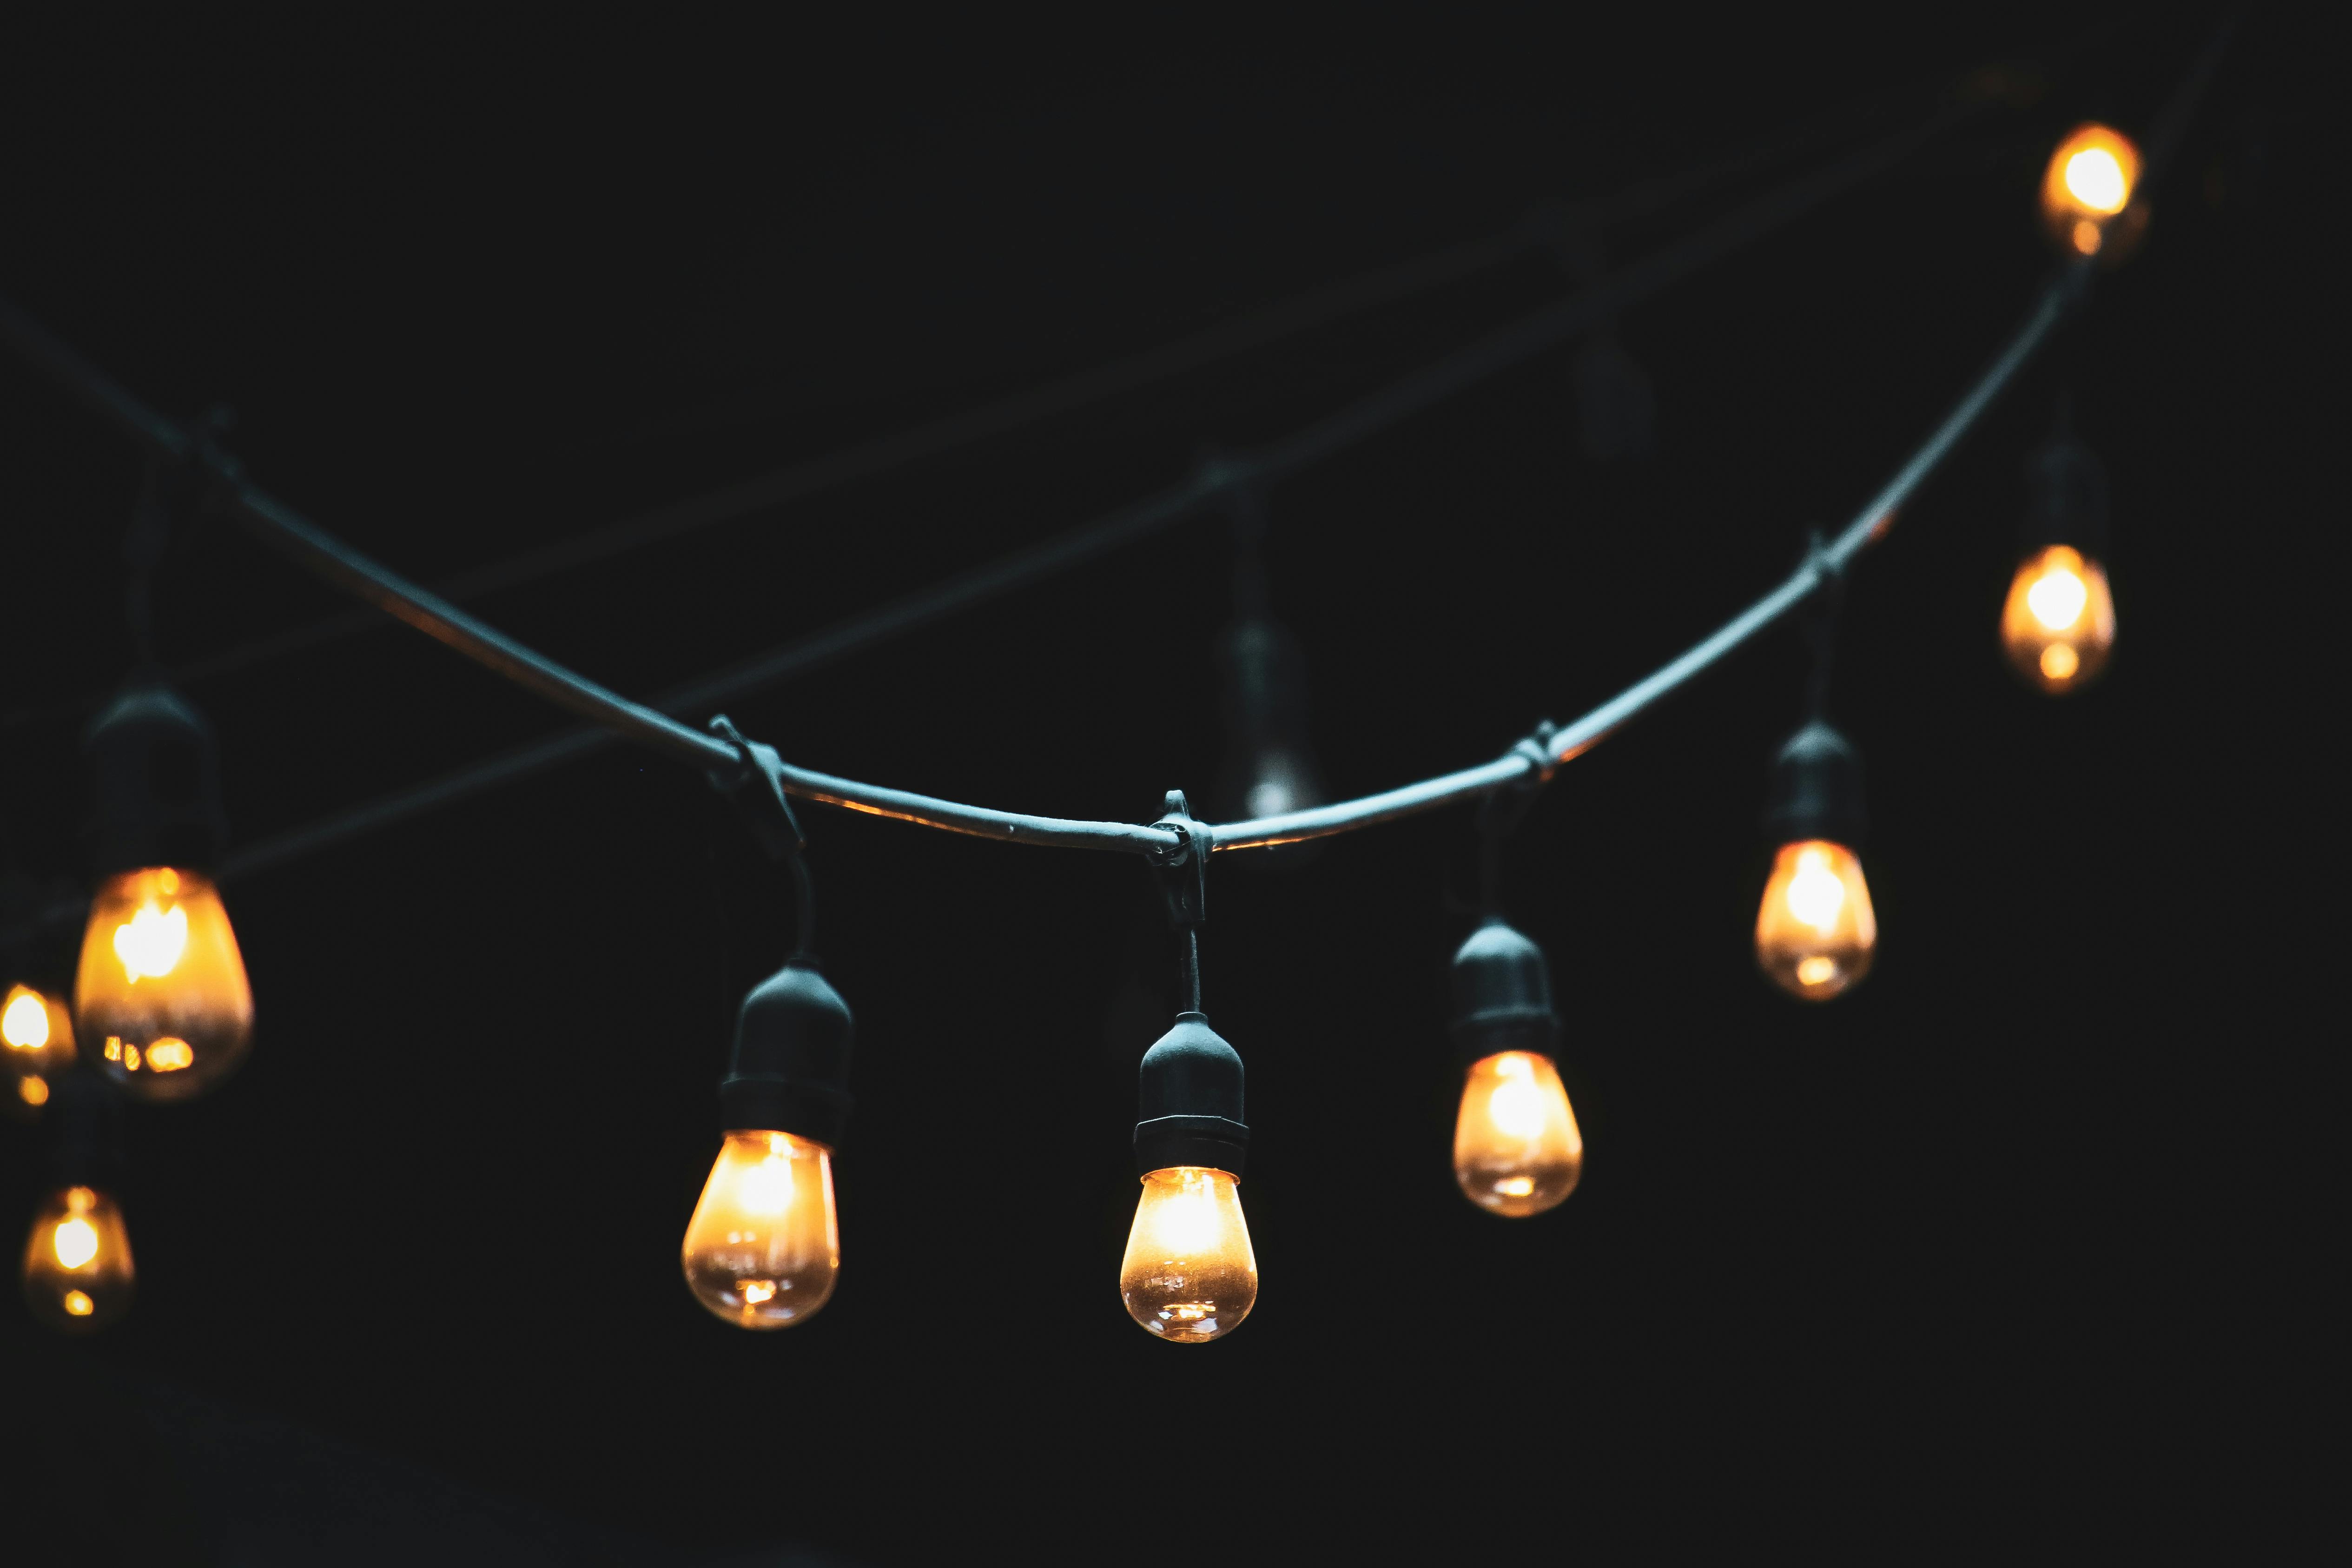 String Lights Images  Free Photos, PNG Stickers, Wallpapers